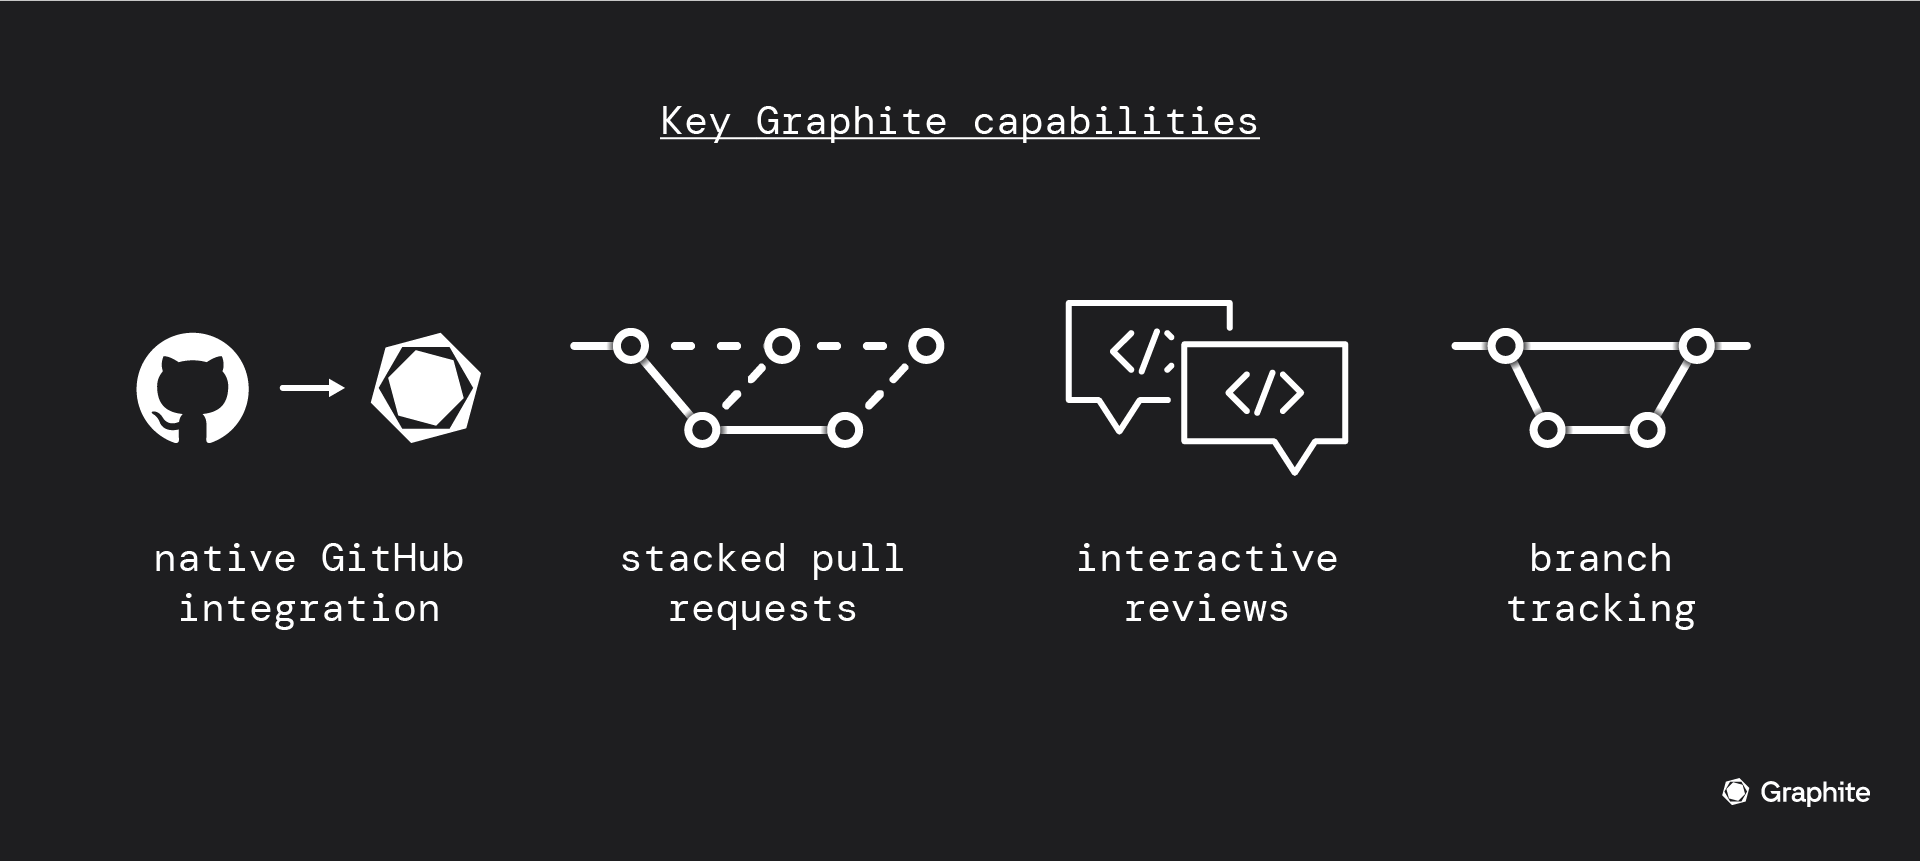 key graphite capabilities: native github integration, stacked pull request, interactive reviews, branch tracking